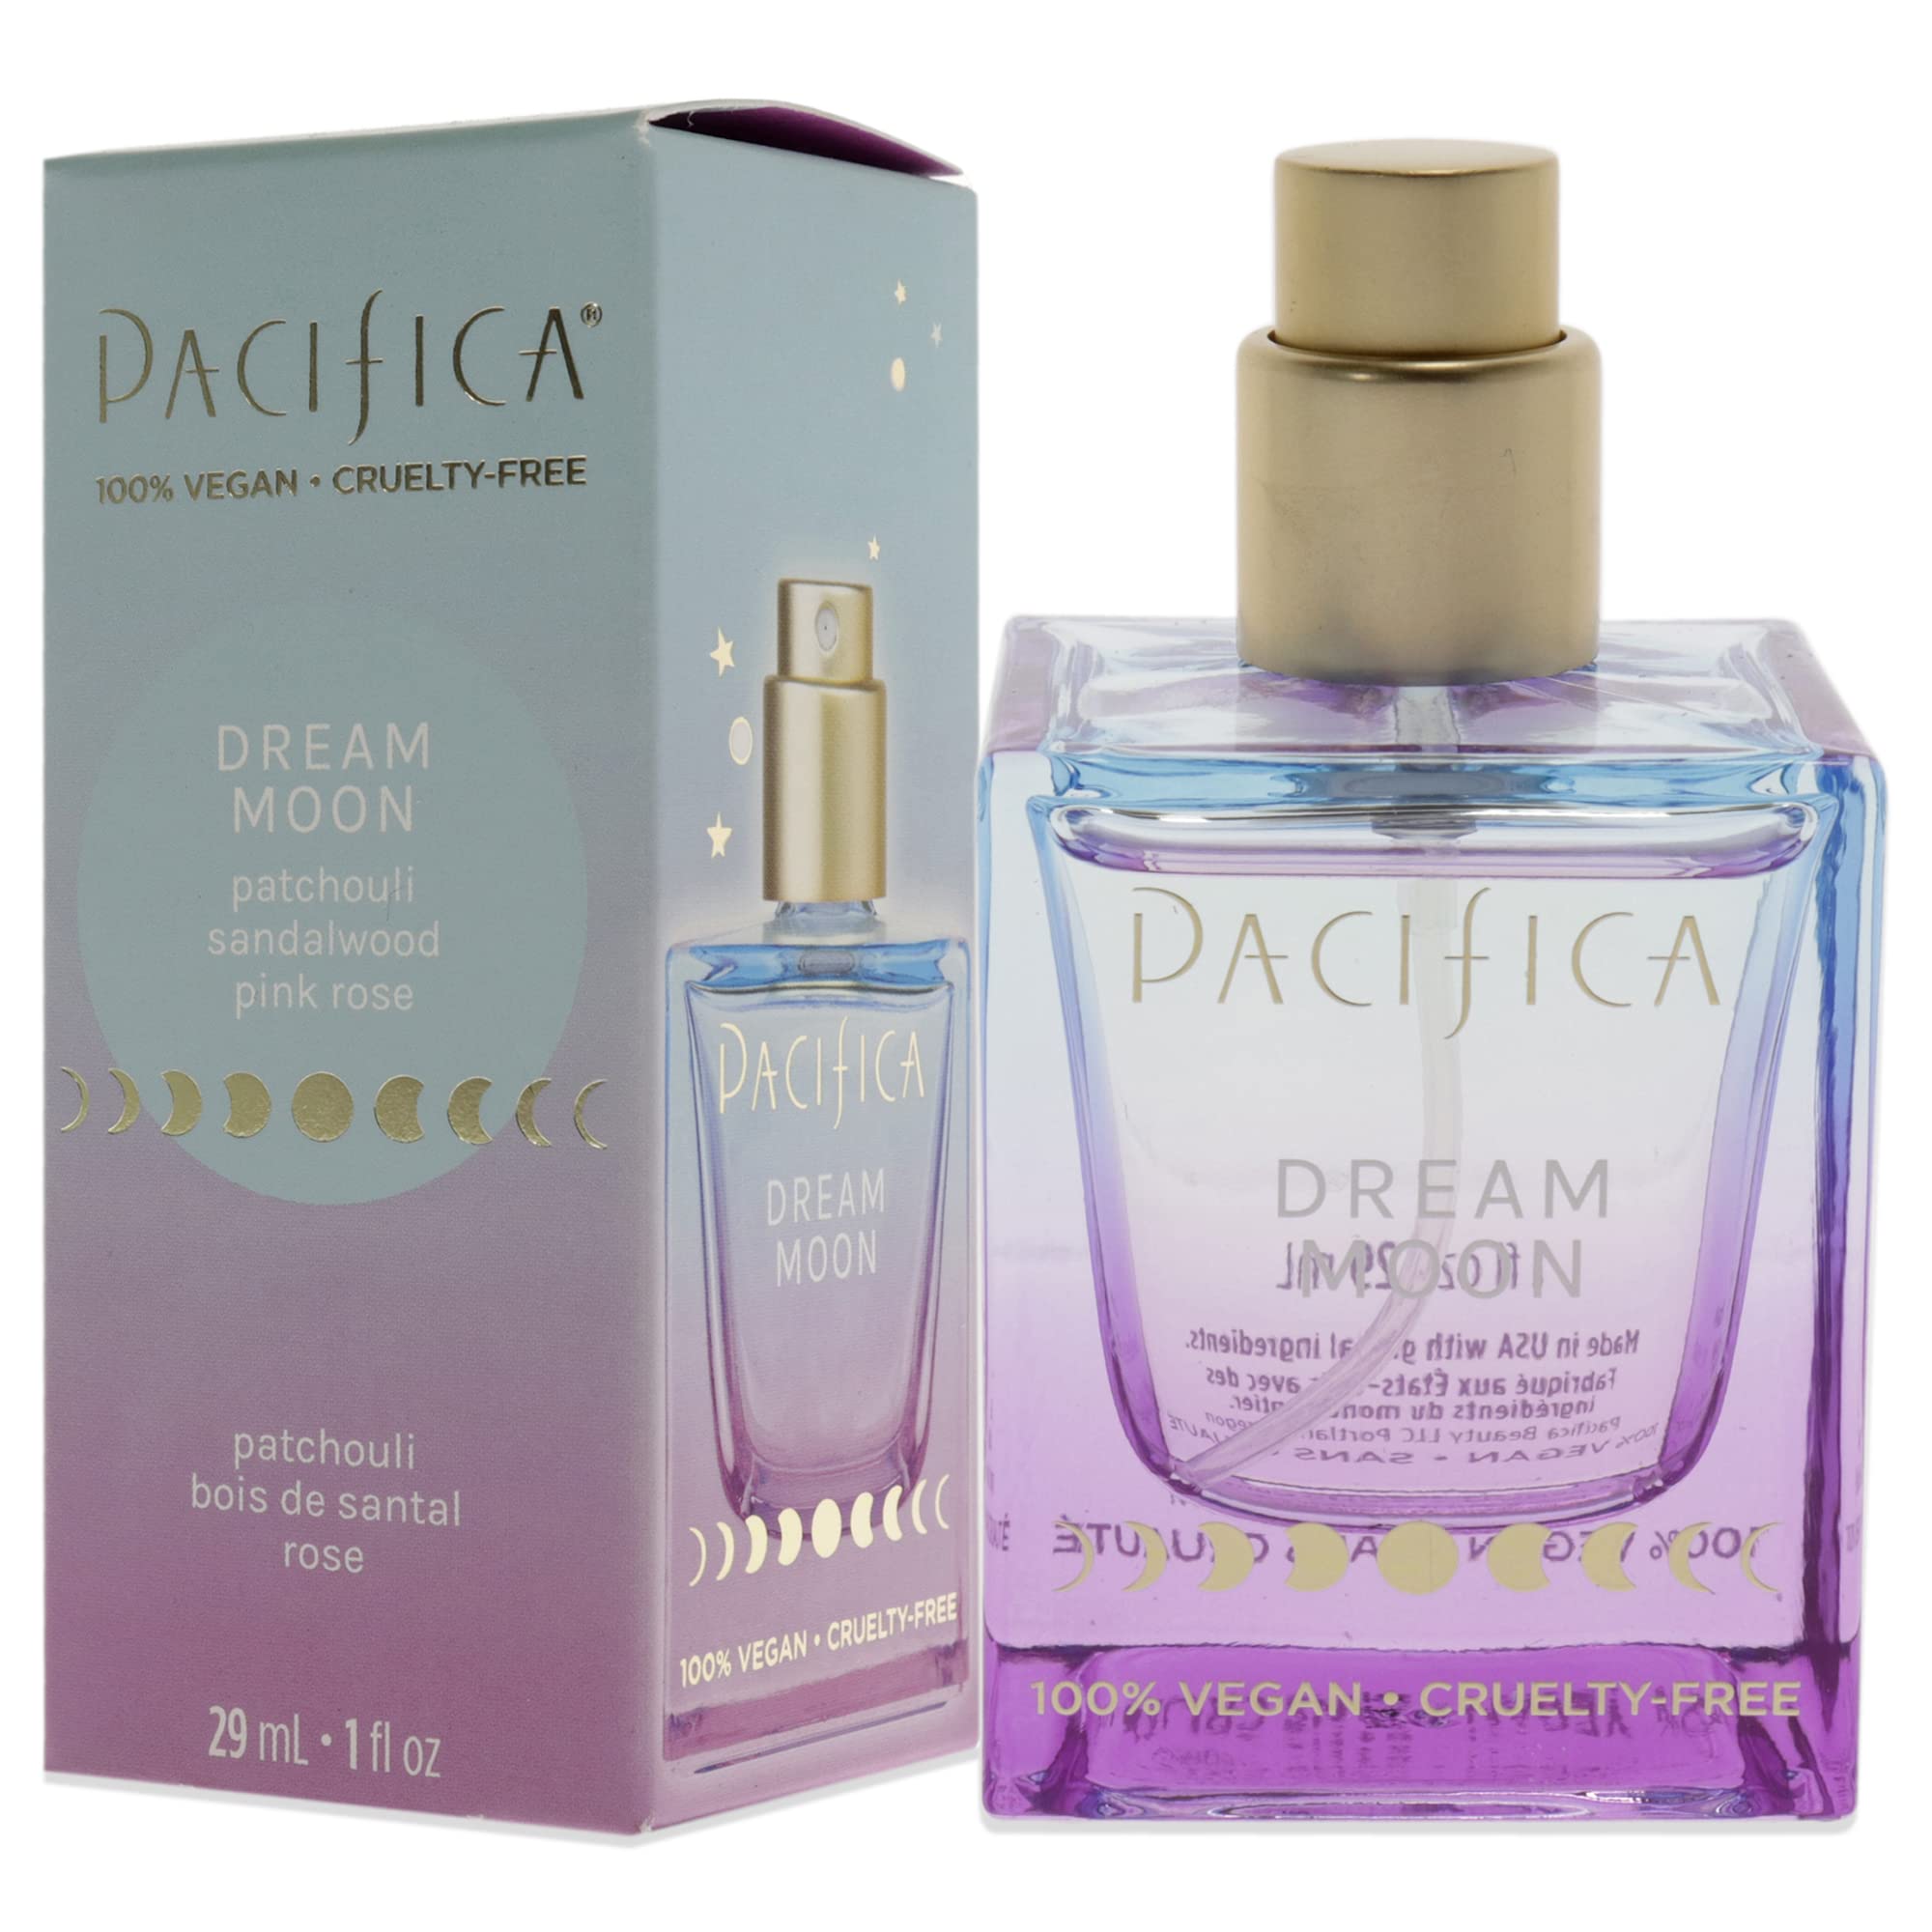 Pacifica Beauty Dream Moon Spray Perfume Pink Rose, Sandalwood, Patchouli Notes Natural + Essential Oils Clean Fragrance Vegan + Cruelty Free